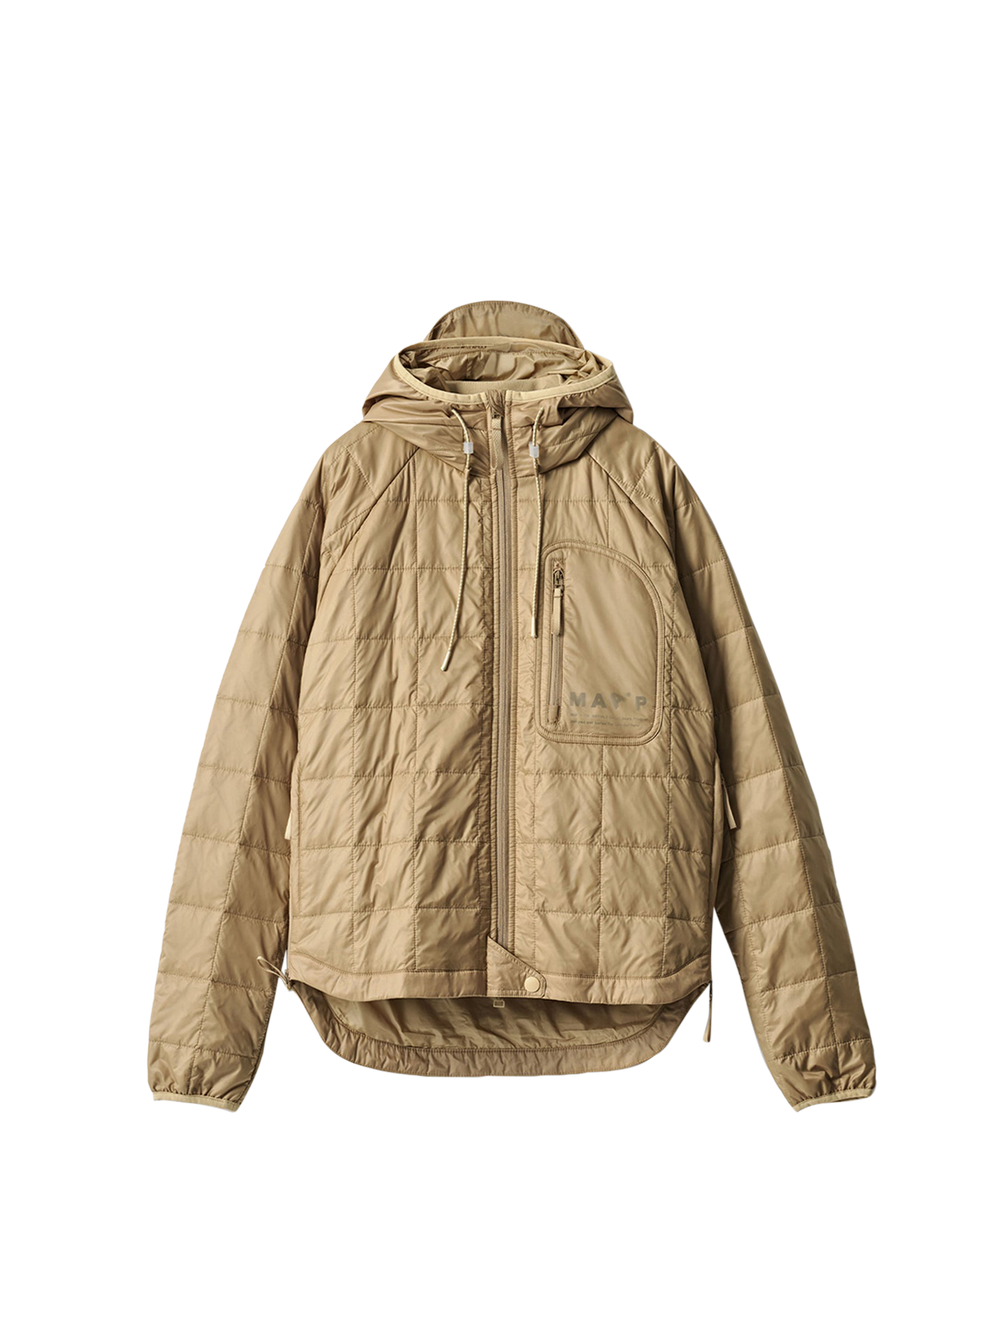 Product Image for The Arrivals + MAAP Alt_Road Haelo Packable Jacket